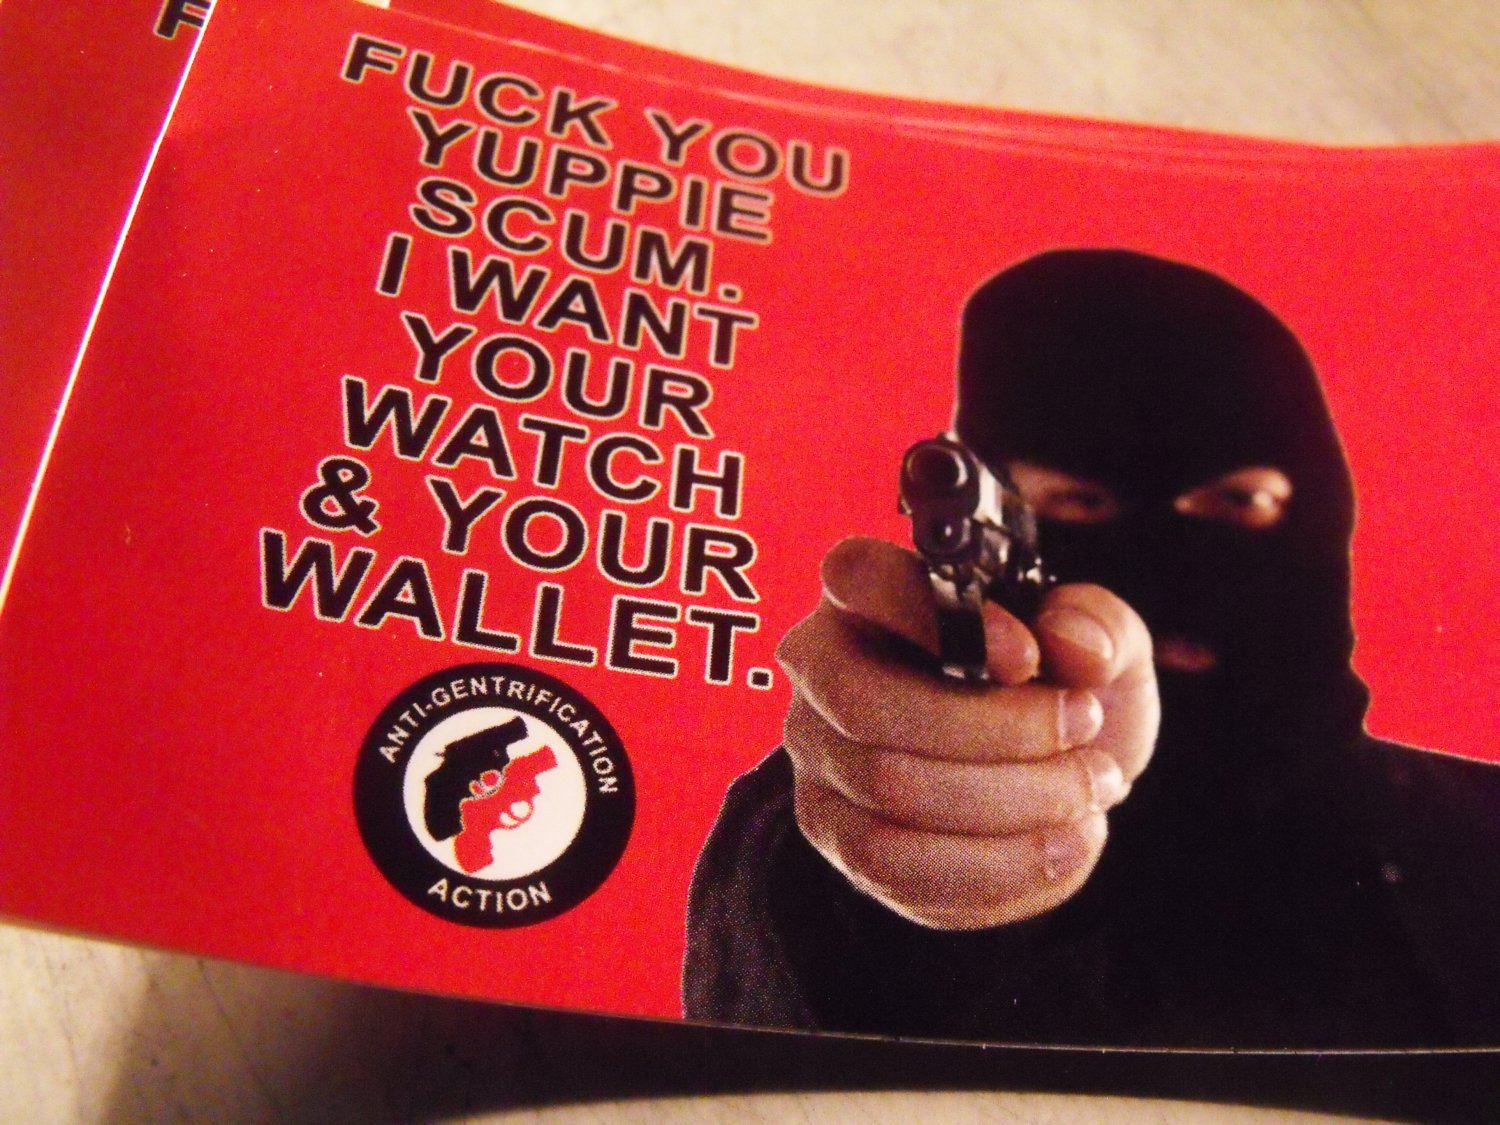 50 FUCK YOU YUPPIE SCUM.  I WANT YOUR WATCH & YOUR WALLET.  3.5" x 2.25"  stickers